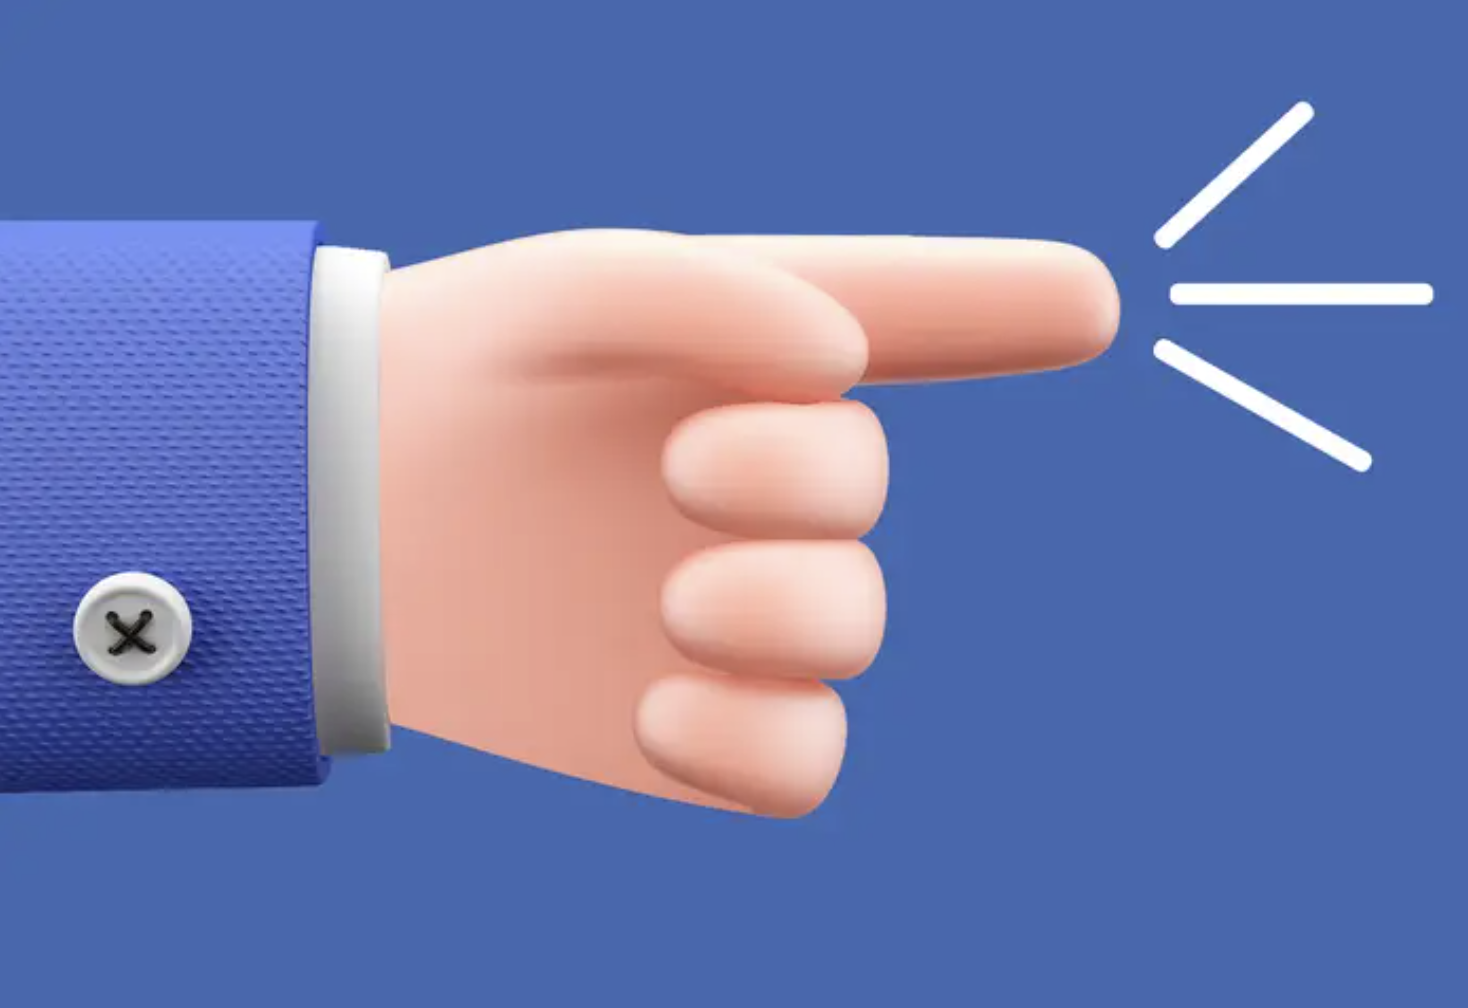 an animated hand with a blue cuffed sleeve reaching out to POKE